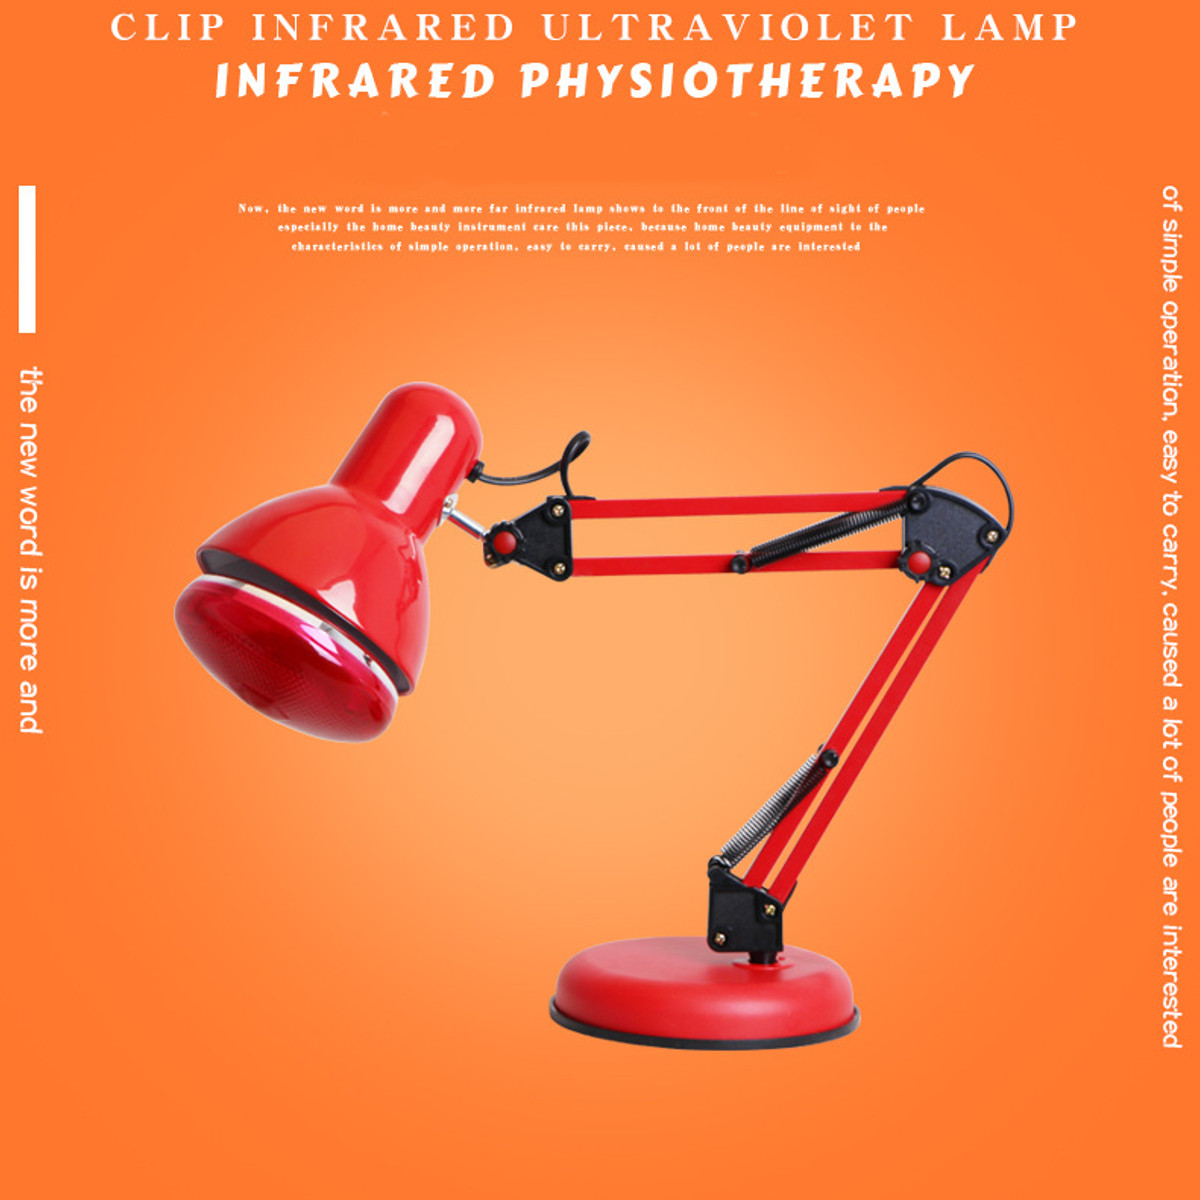 100W-Floor-Stand-Infrared-Therapy-Heat-Lamp-Health-Pain-Relief-Physiotherapy-1776812-7